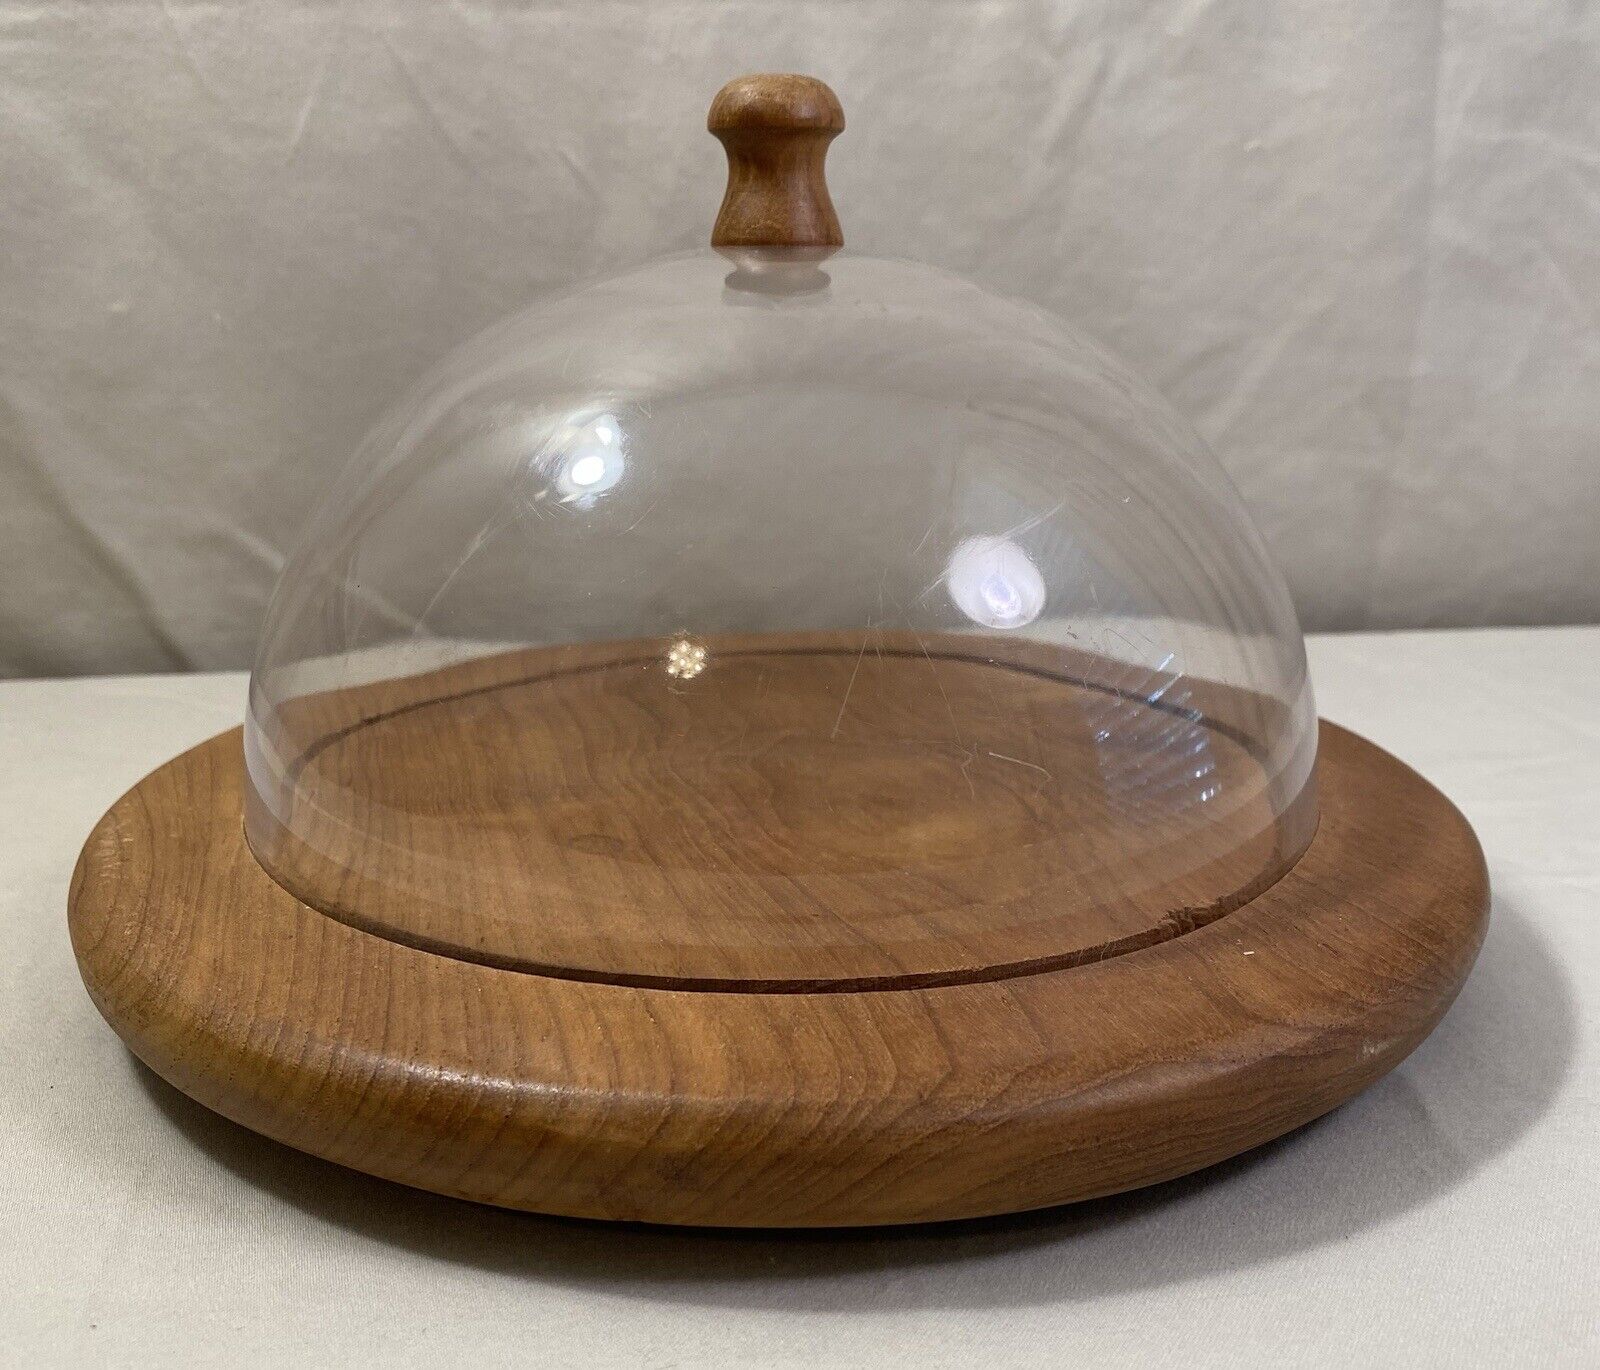 VINTAGE Wood Cloche Wooden Cheese Tray & Acrylic Dome Lid, Small Charcuterie